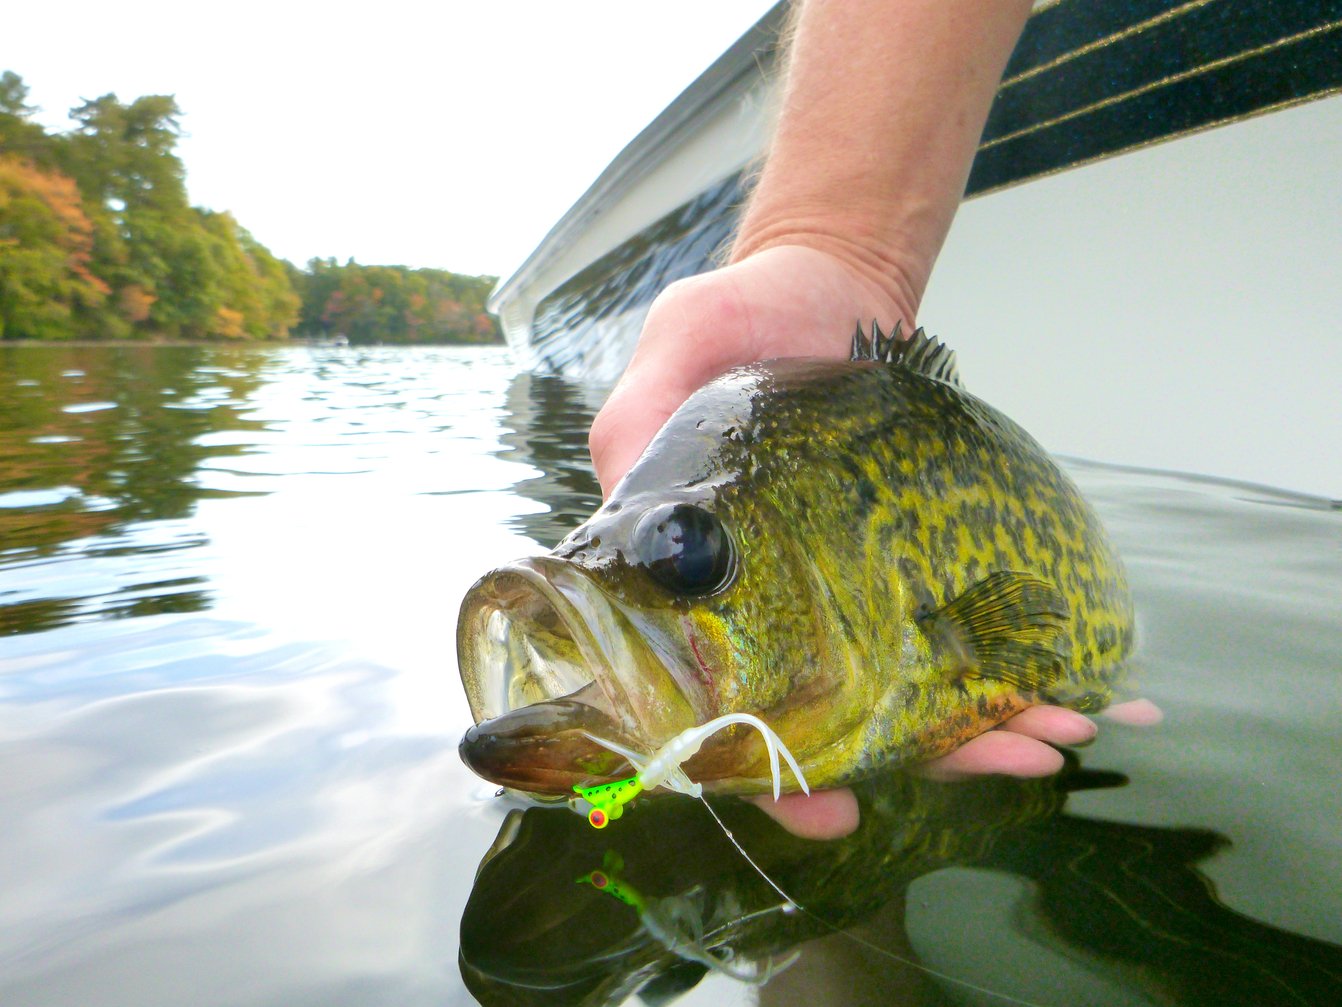 Angler caught a crappie on an Impulse Water Flea jig.